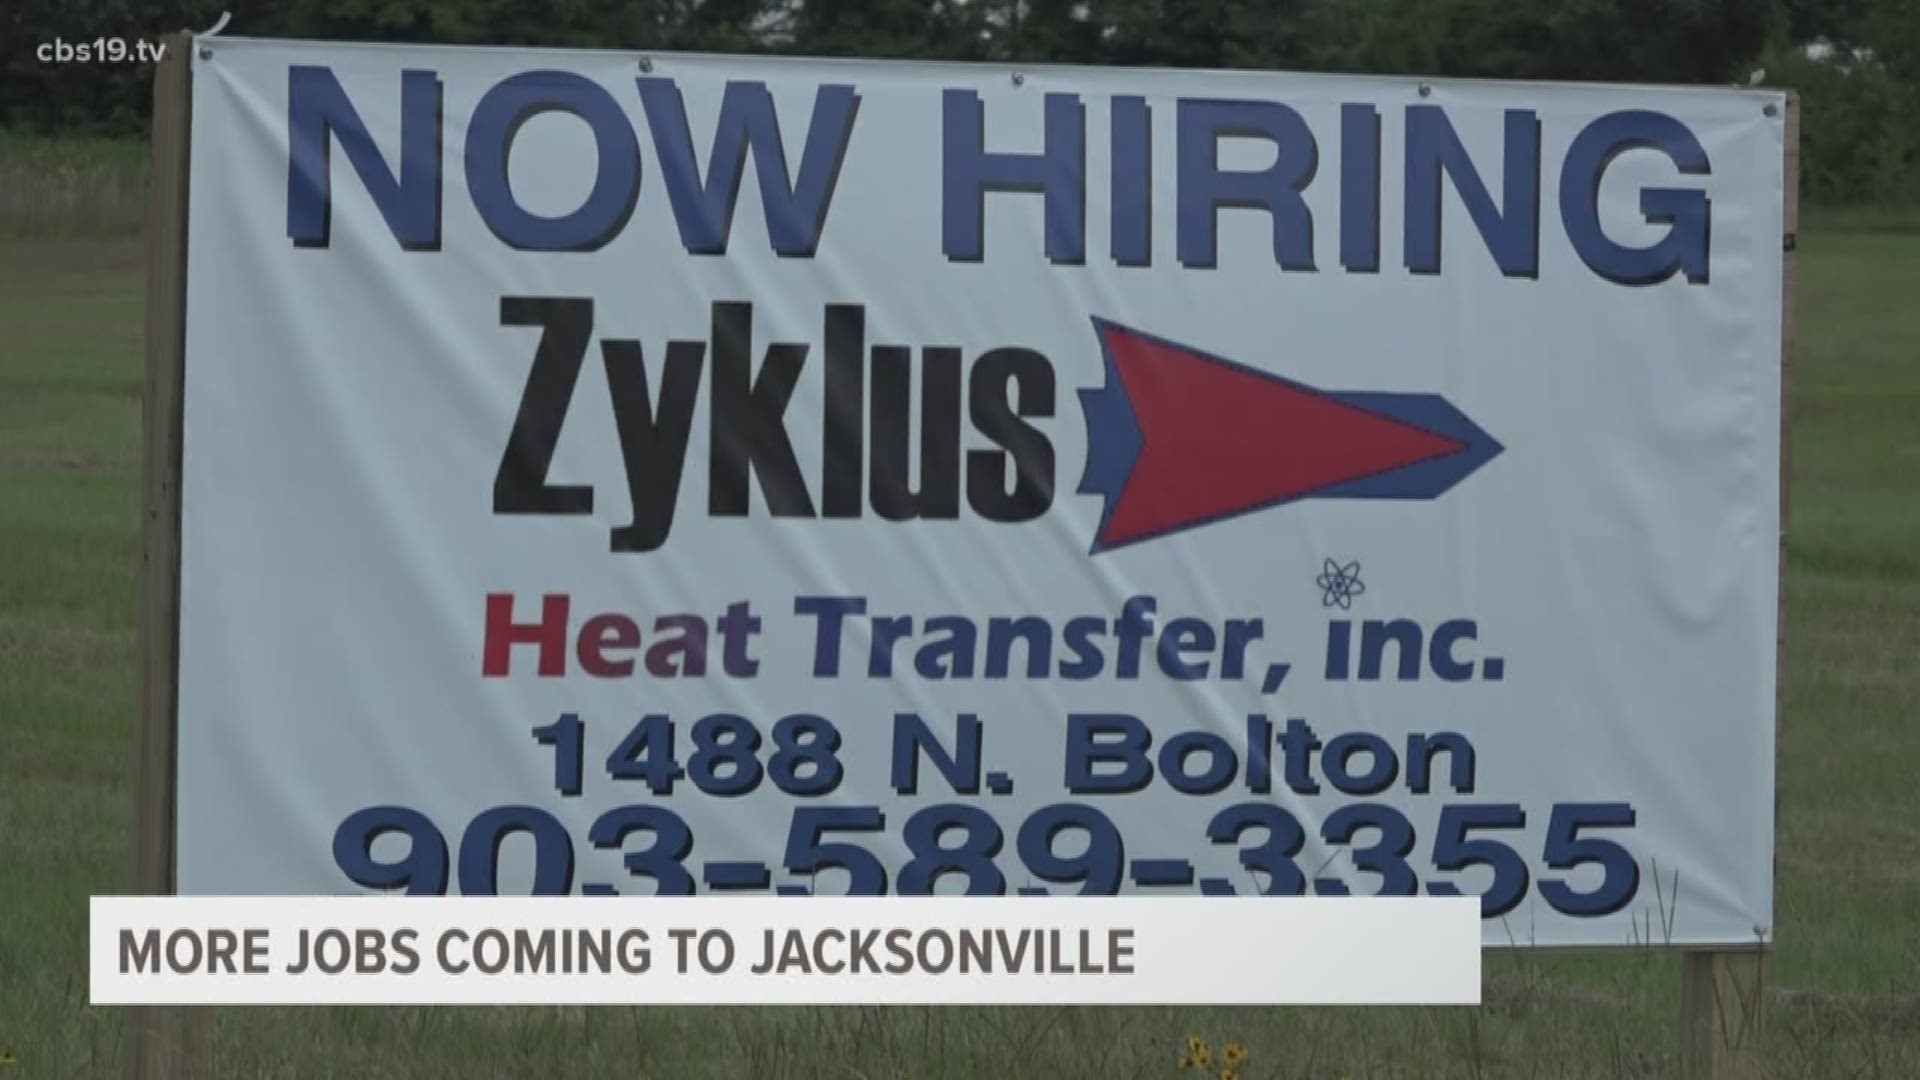 More jobs coming to Jacksonville